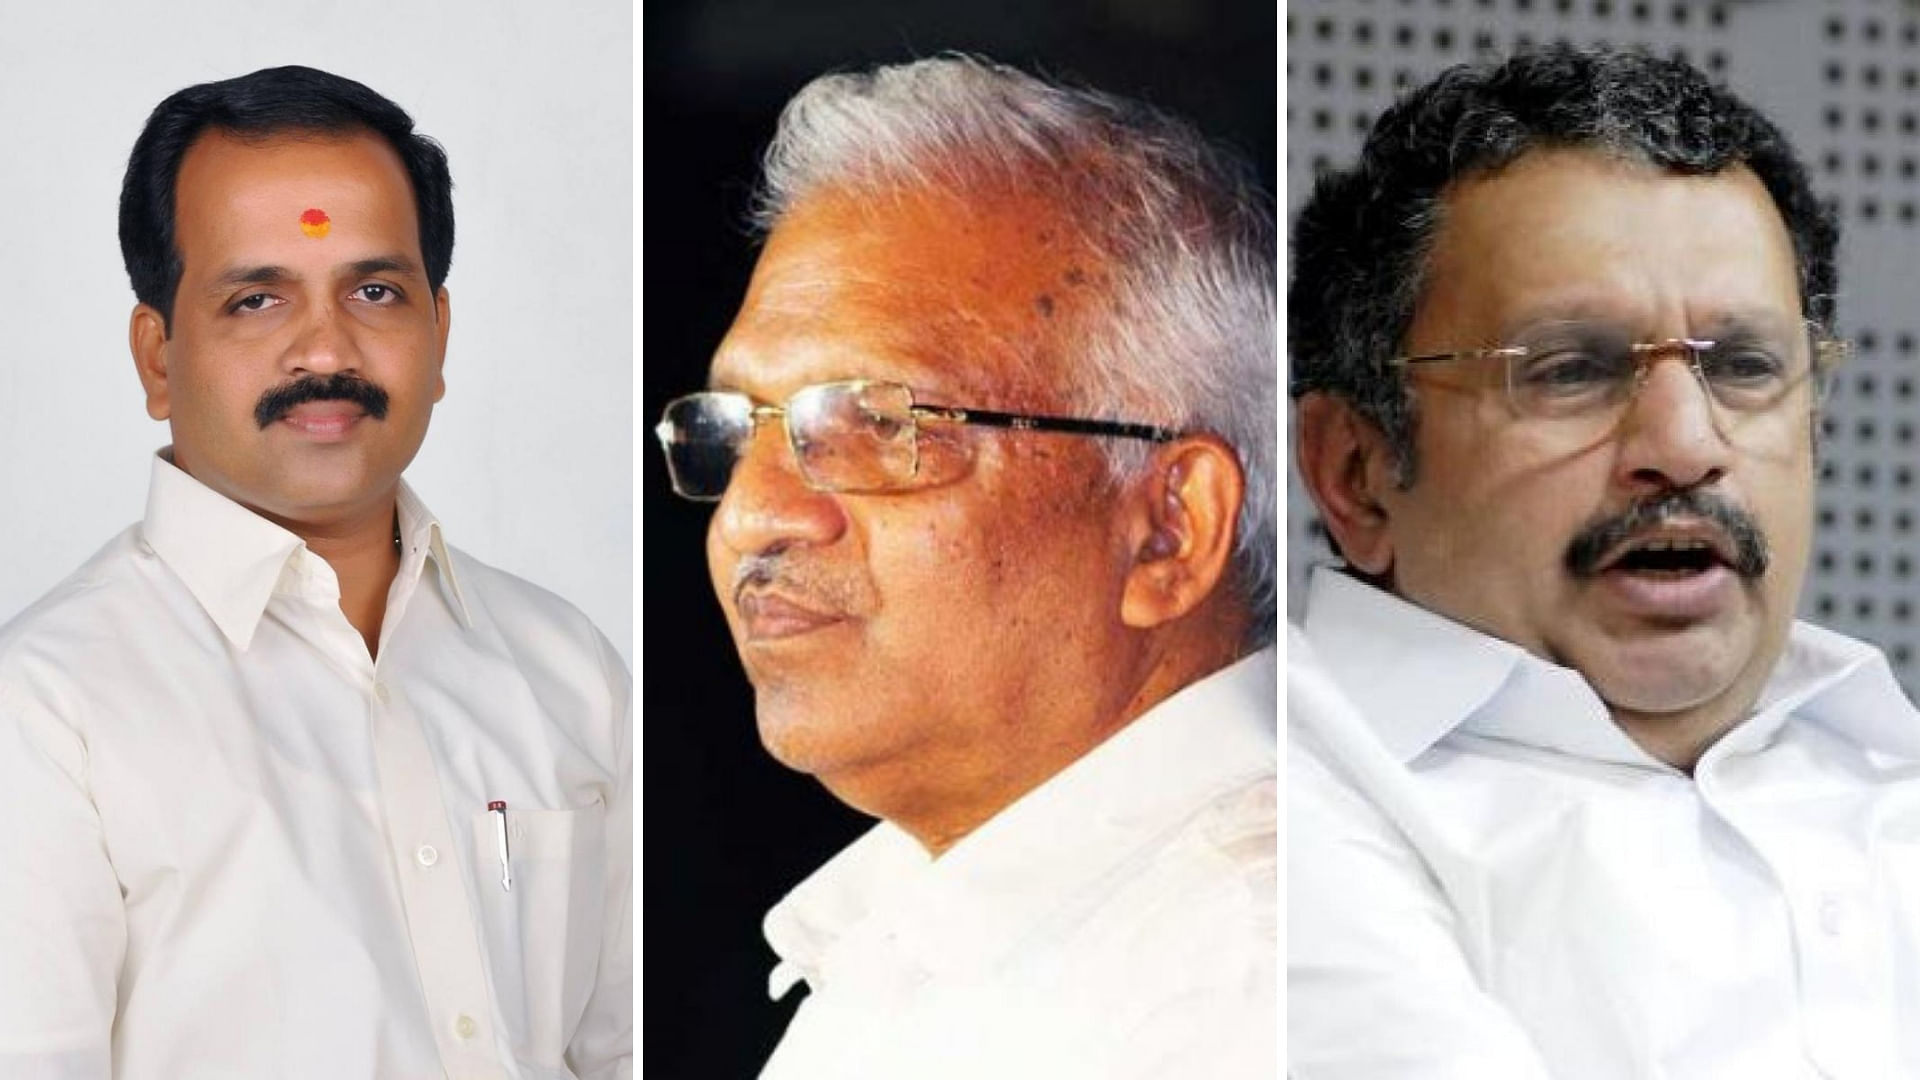 CPM's senior leader P Jayarajan (C), an accused in two political murder cases and alleged to be mastermind of political violence, is the LDF candidate. The UDF, with the intention of giving a strong political fight, fielded senior Congress leader and sitting MLA K Muraleedharan (R). V K Sajeevan (BJP) (L)